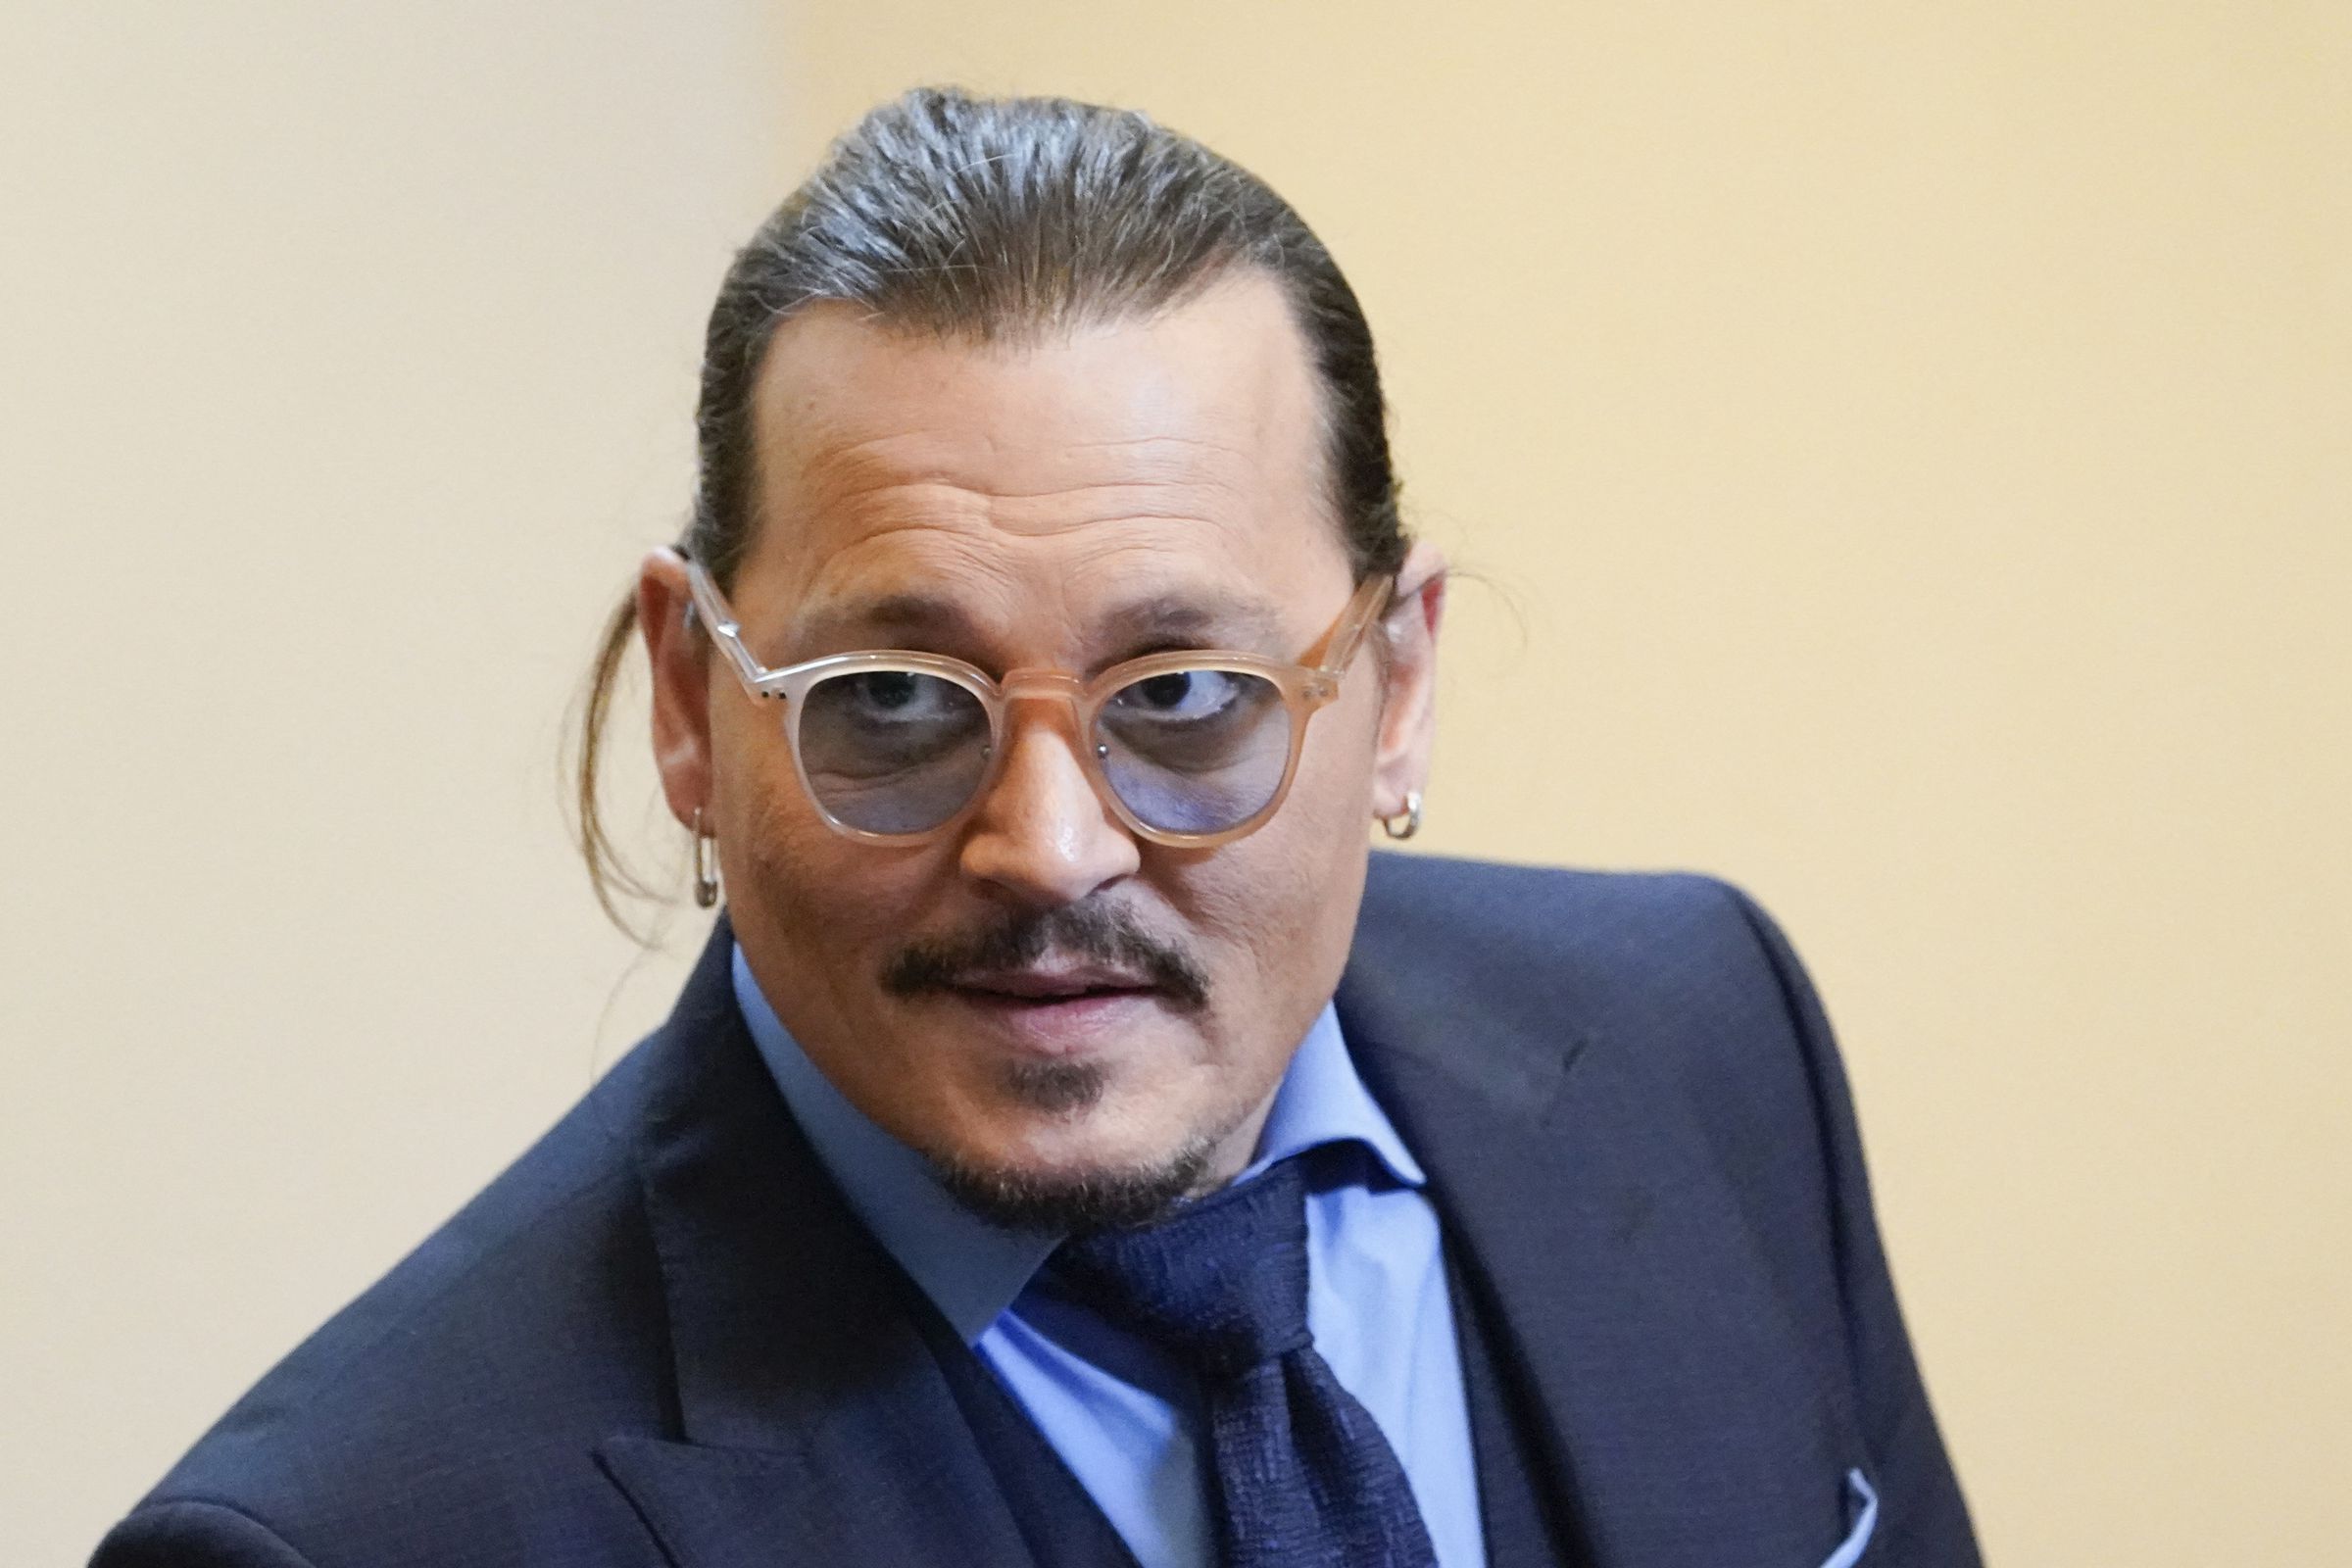 Actor Johnny Depp appears in the courtroom at the Fairfax County Circuit Courthouse in Fairfax, Virginia, on May 27th, 2022.